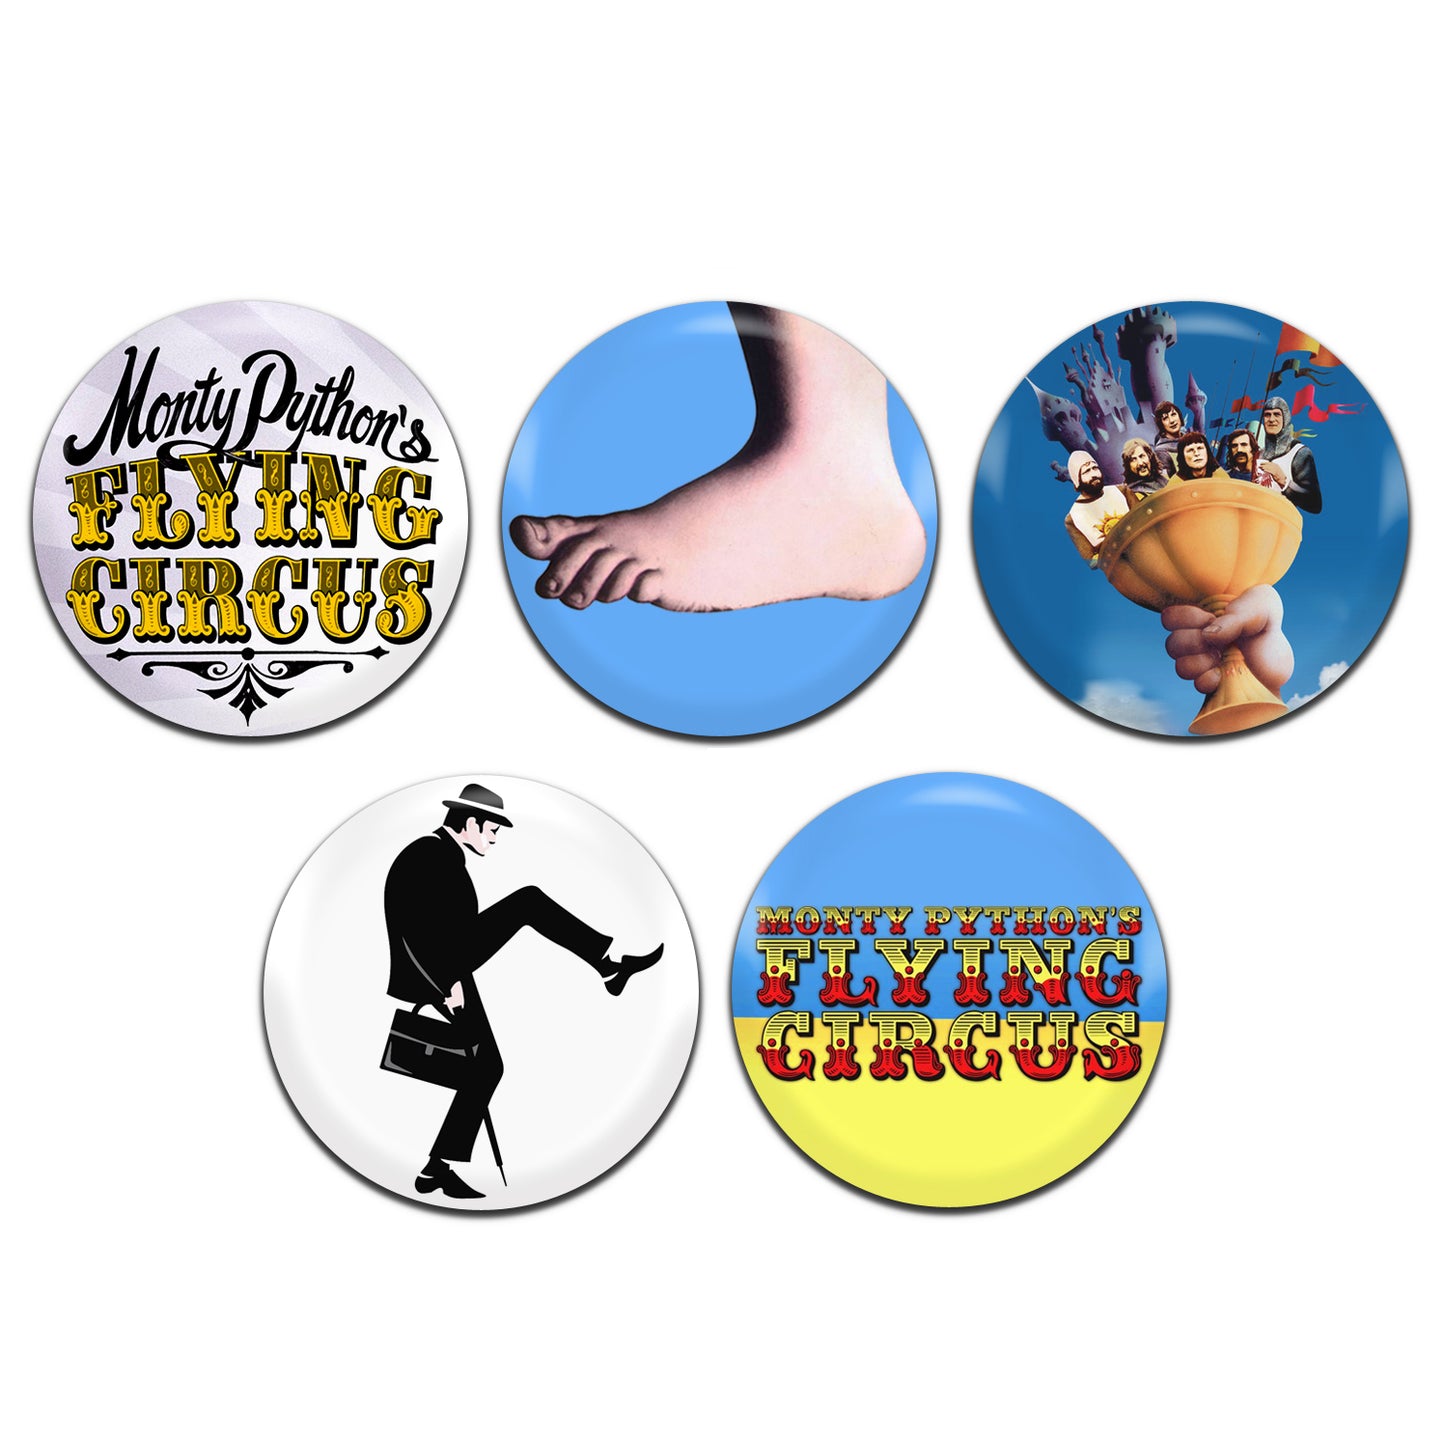 Monty Python Classic Comedy TV Film Movie 25mm / 1 Inch D-Pin Button Badges (5x Set)